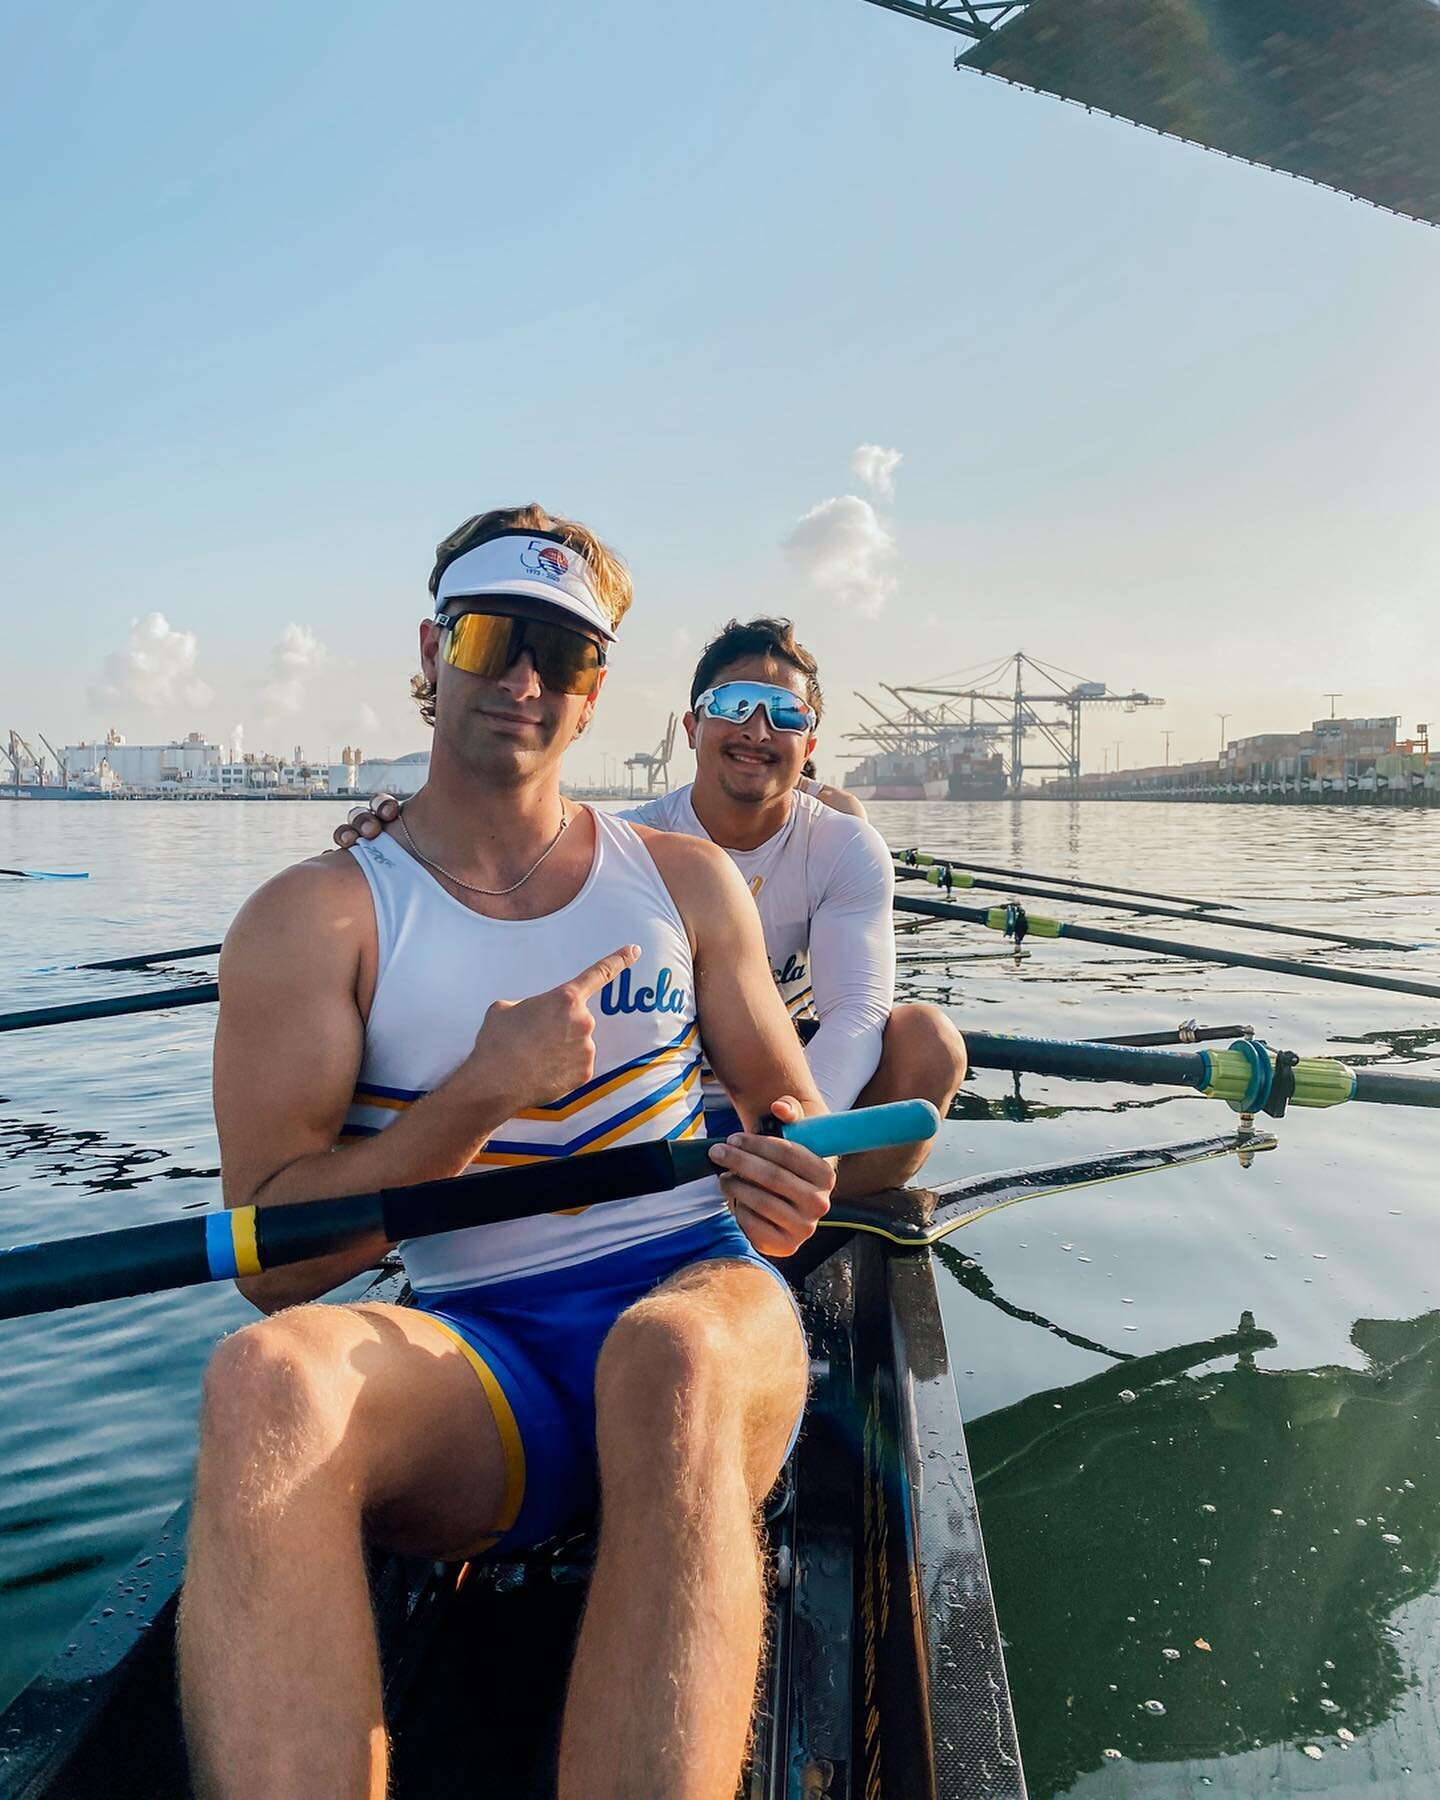 🧹WE SWEPT THE TROJANS🧹

The Bruins Oarsmen took first in all events this past weekend against cross town rival USC!

We are excited about our program depth with multiple Bruin boats crossing the line before the top Trojan crews.

Congratulations to